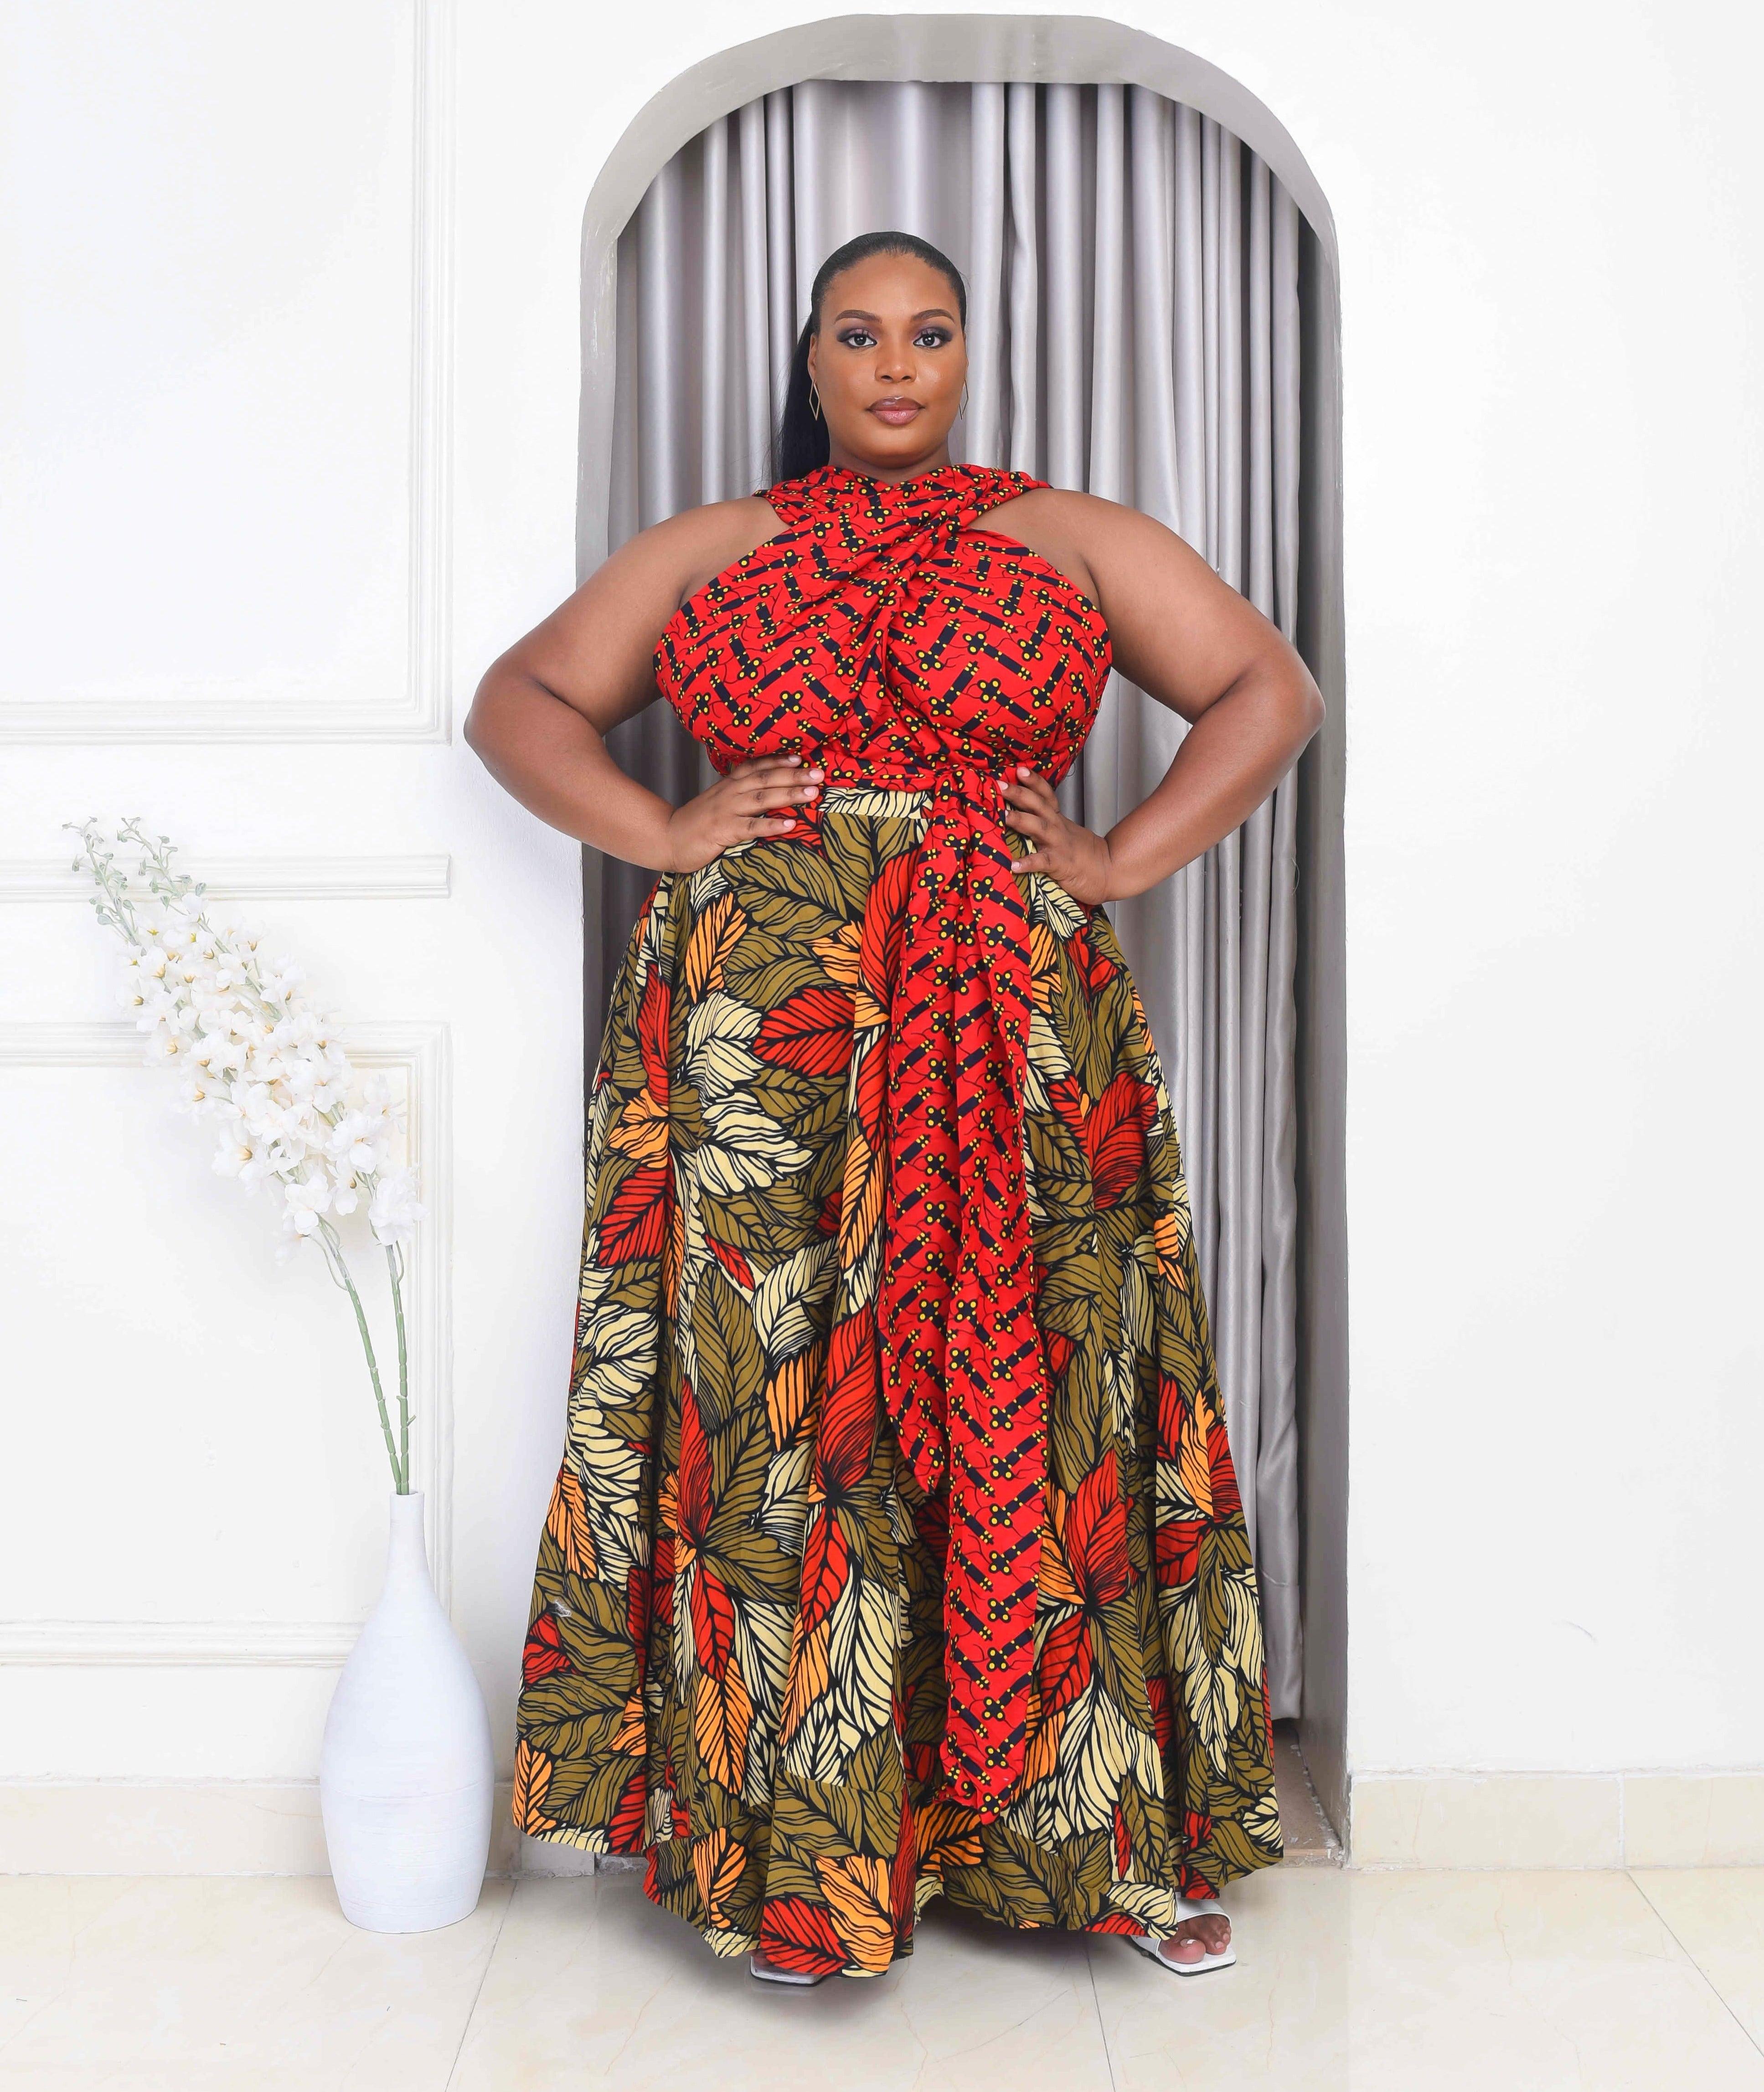 QueenFunky African Americans fashion QFY African Dresses For Women Traditional  Plus Size Boubou Ankara Dashiki Embroidery Lace Dress Wedding Party Evening  Gown Robes Ankara Style